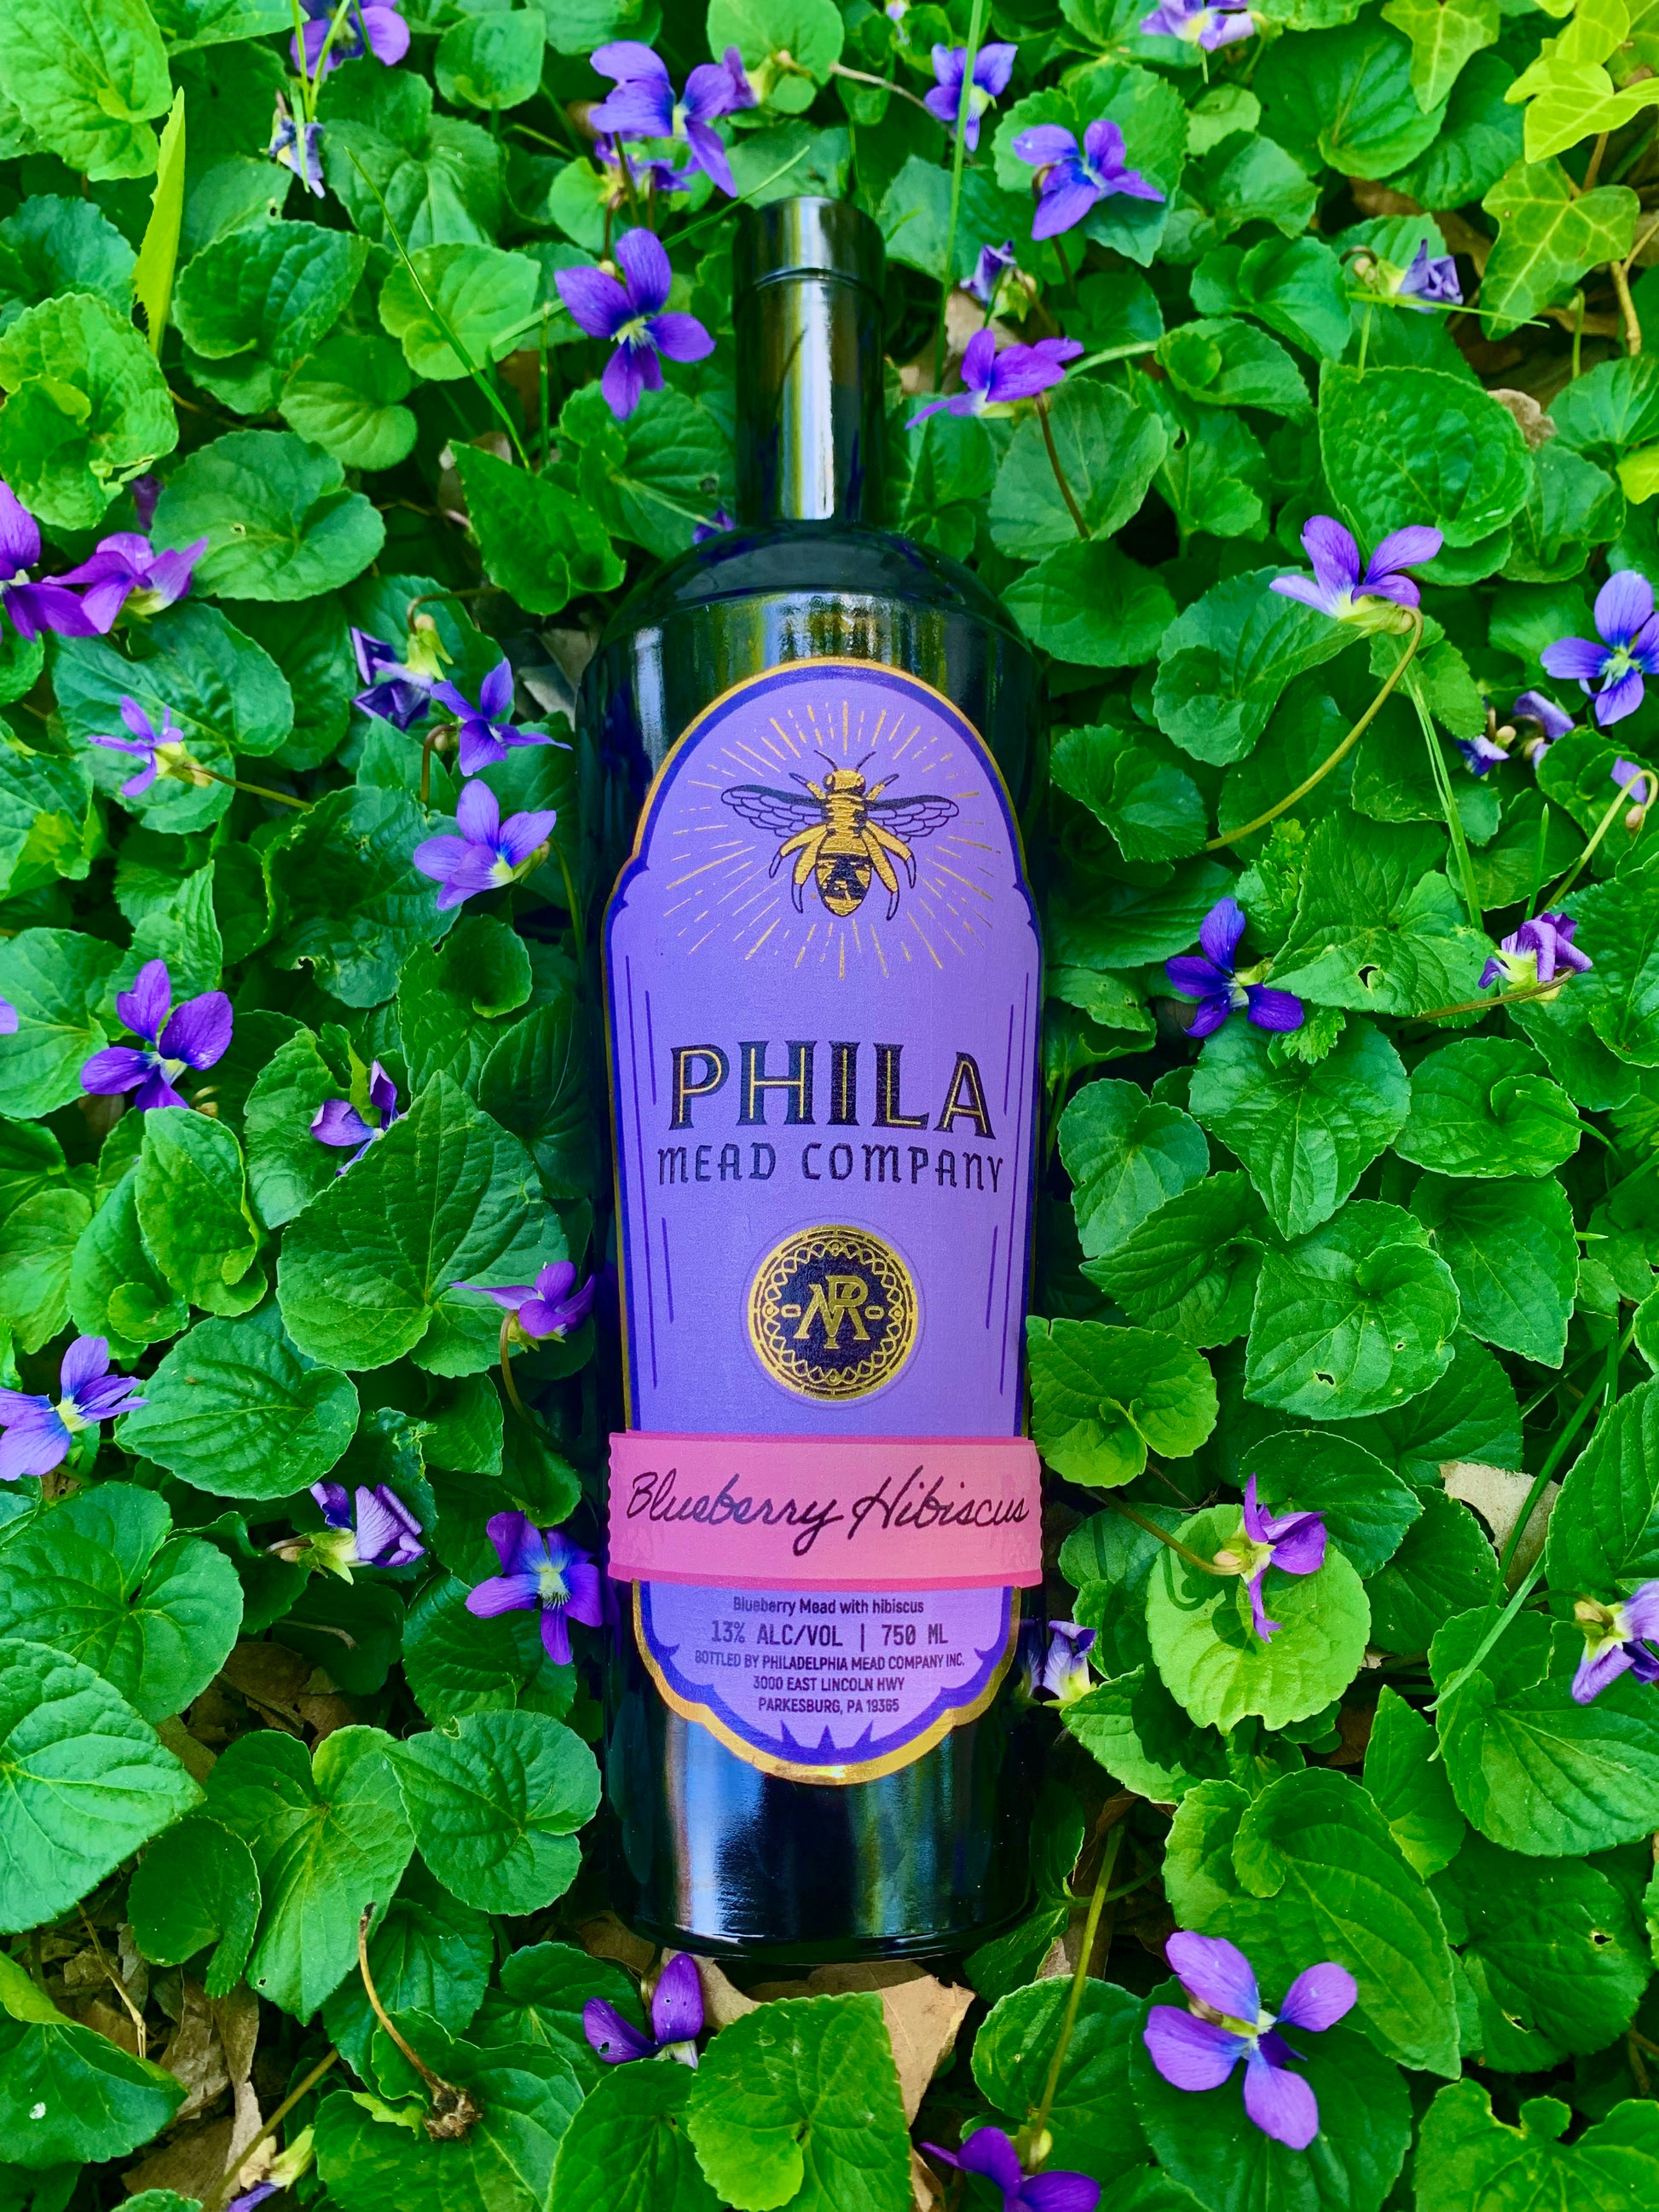 A bottle of our Blueberry Hibiscus mead, lain in a field of violets